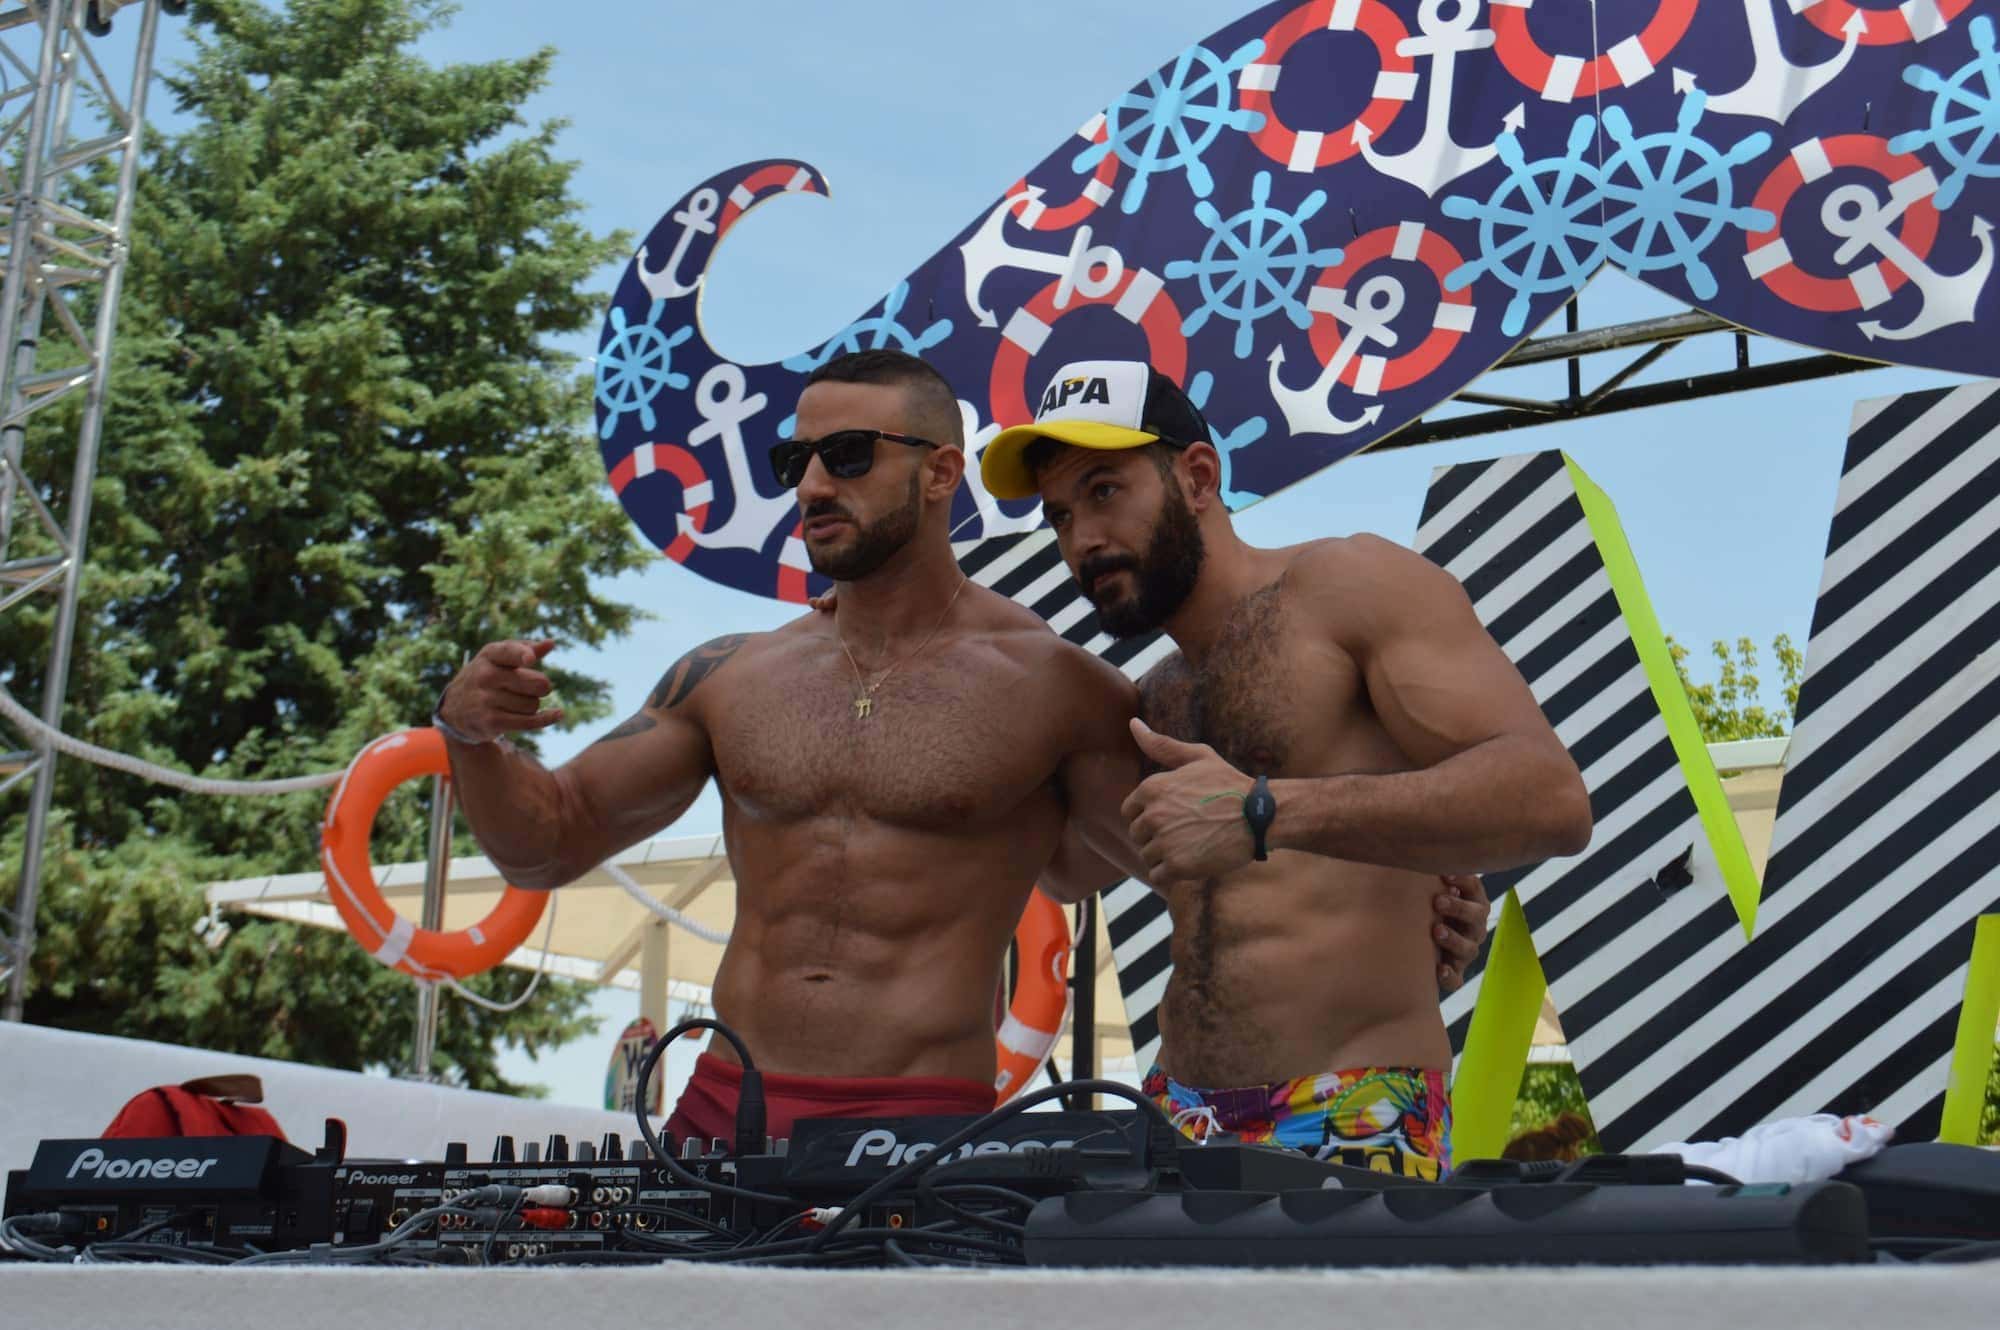 Gay Parties and Events in Madrid - Travel Gay